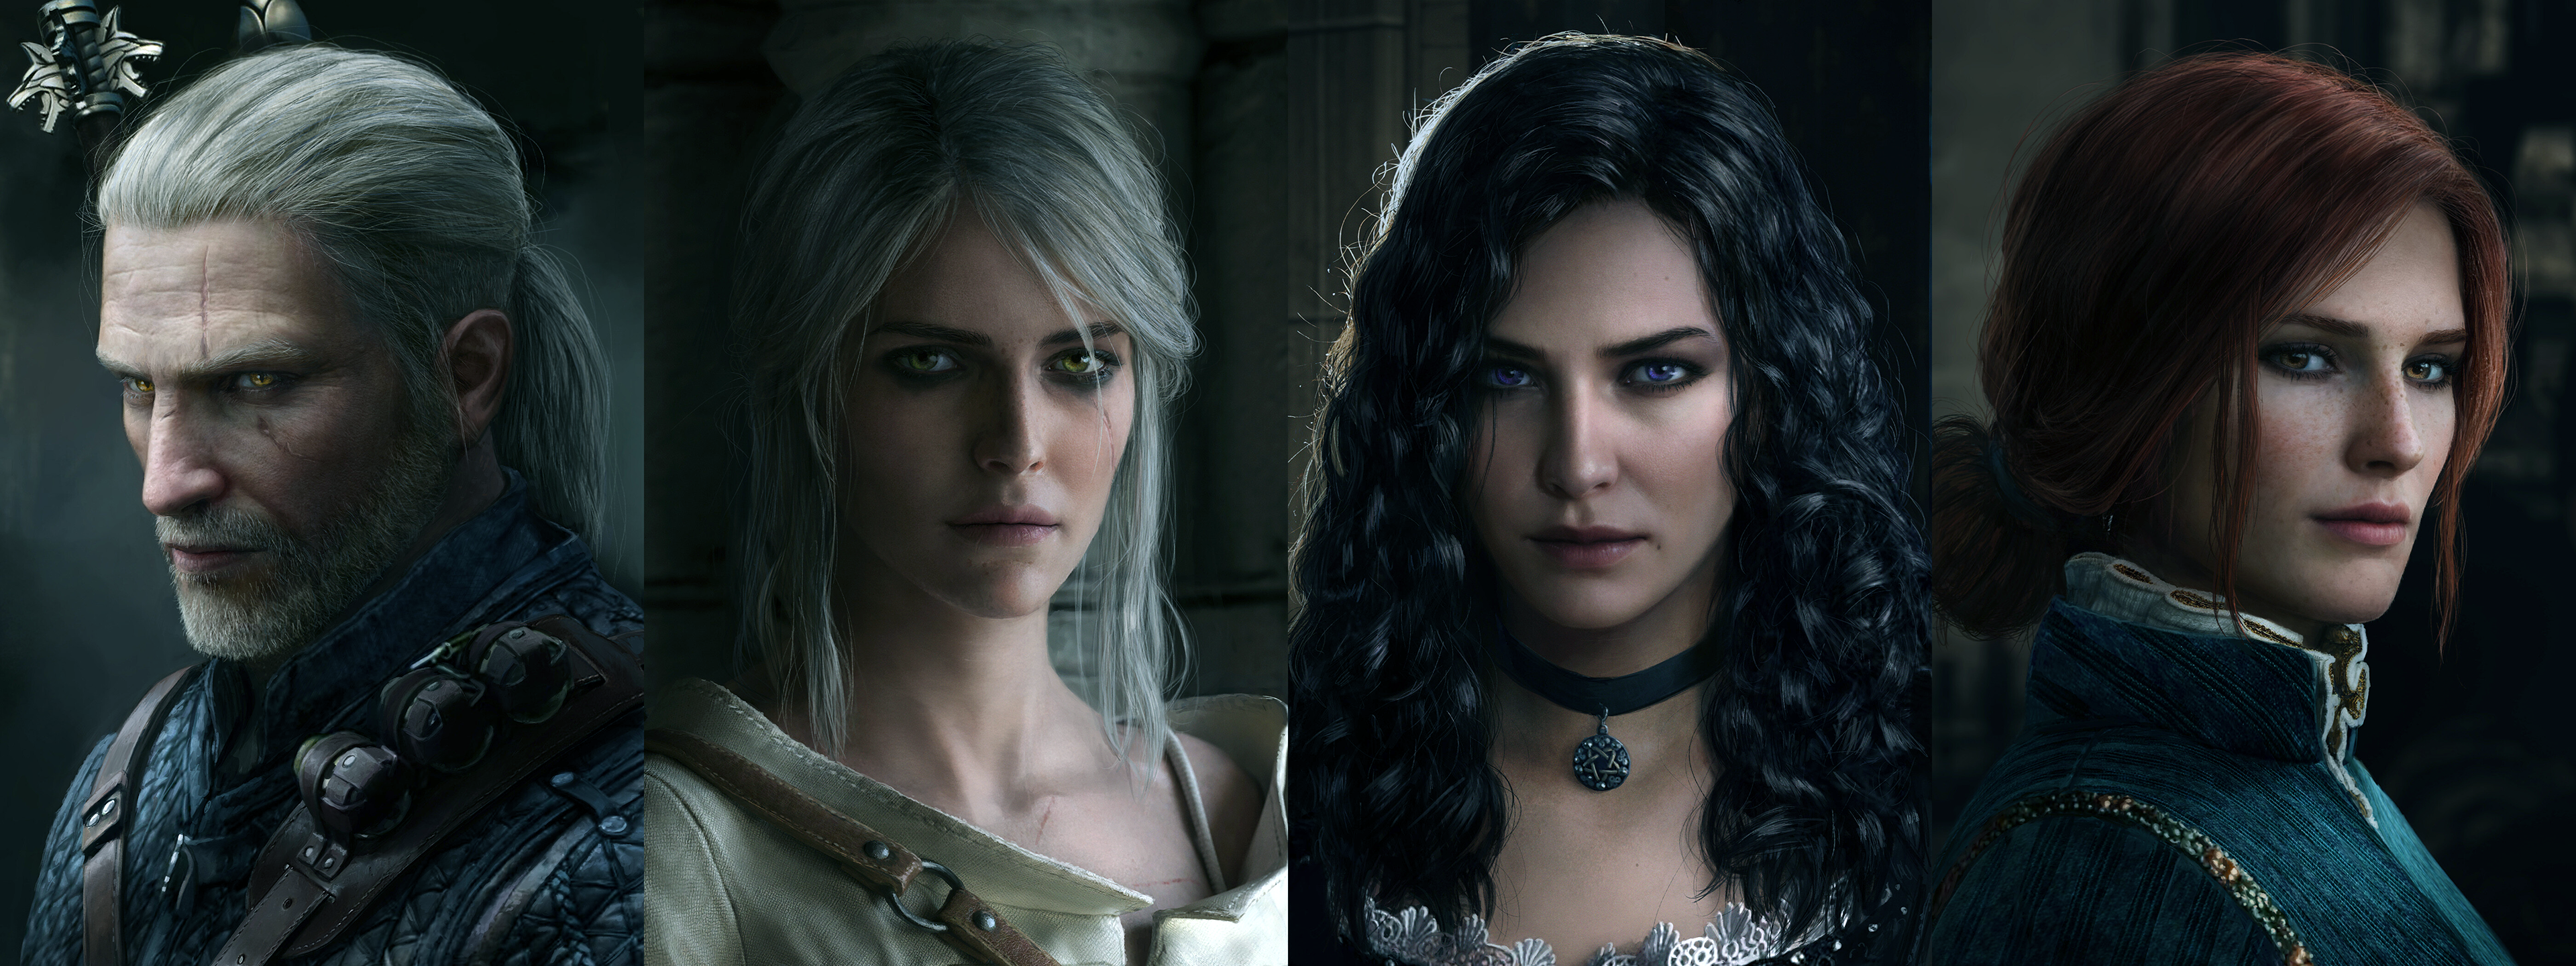 Yennefer Of Vengerberg Geralt Of Rivia Video Game Characters The Witcher The Witcher 3 3840x1440